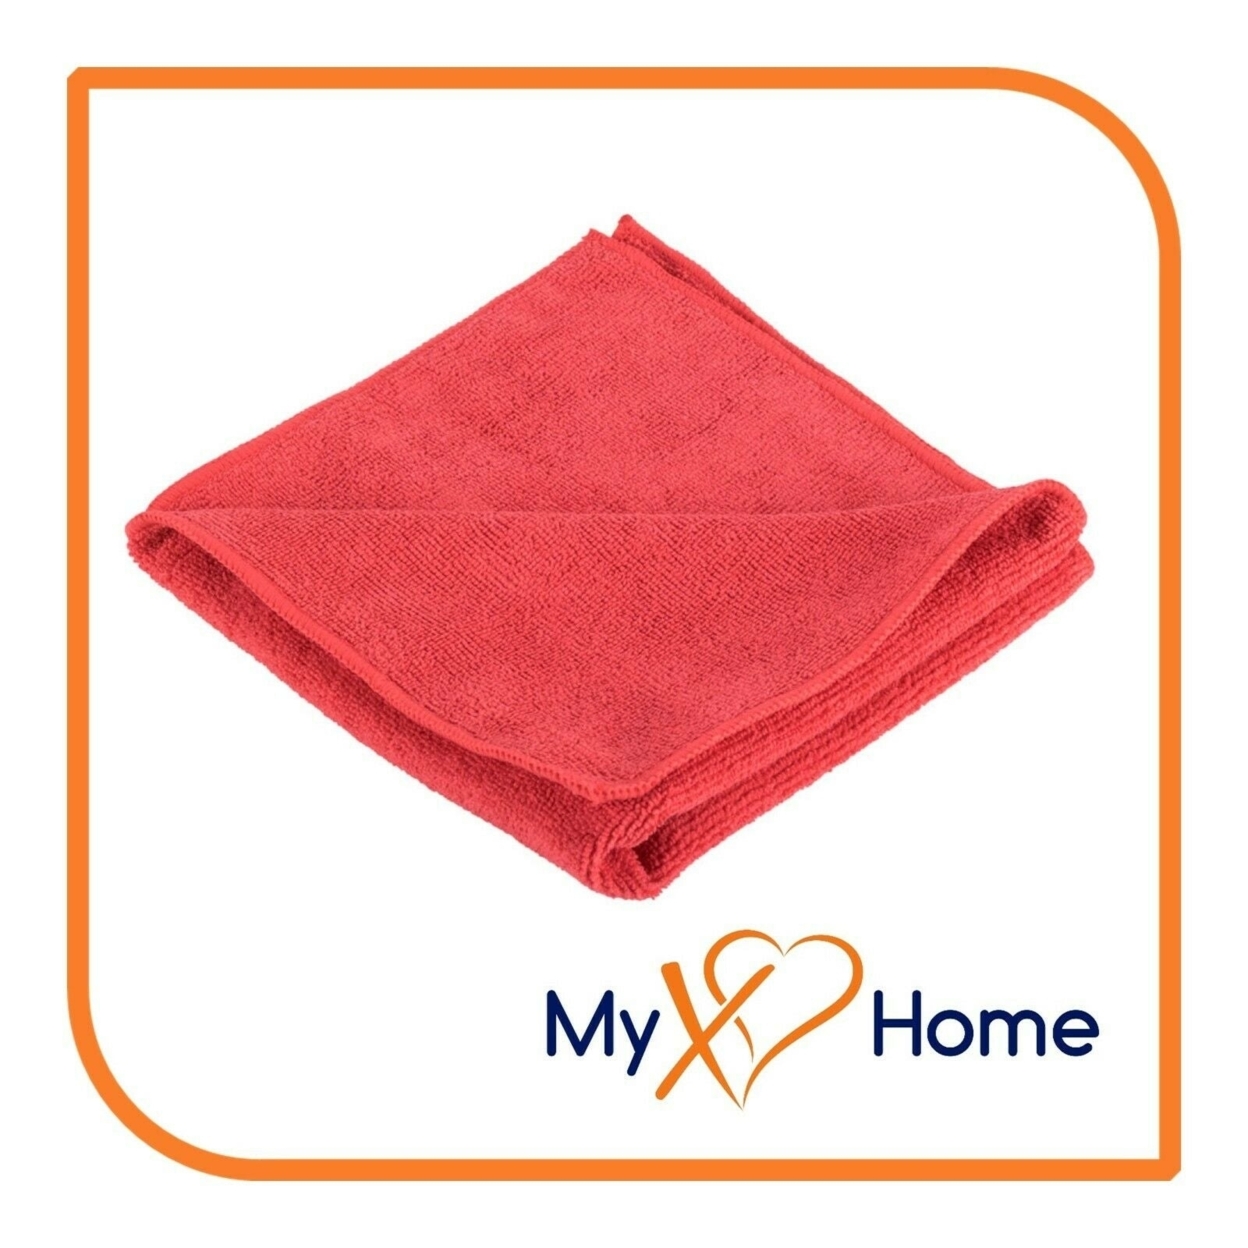 MyXOHome 12 x 16 Red Microfiber Towel by MyXOHome XOH-CLE-TOW-MIC-1025x1 a) 1 Towel